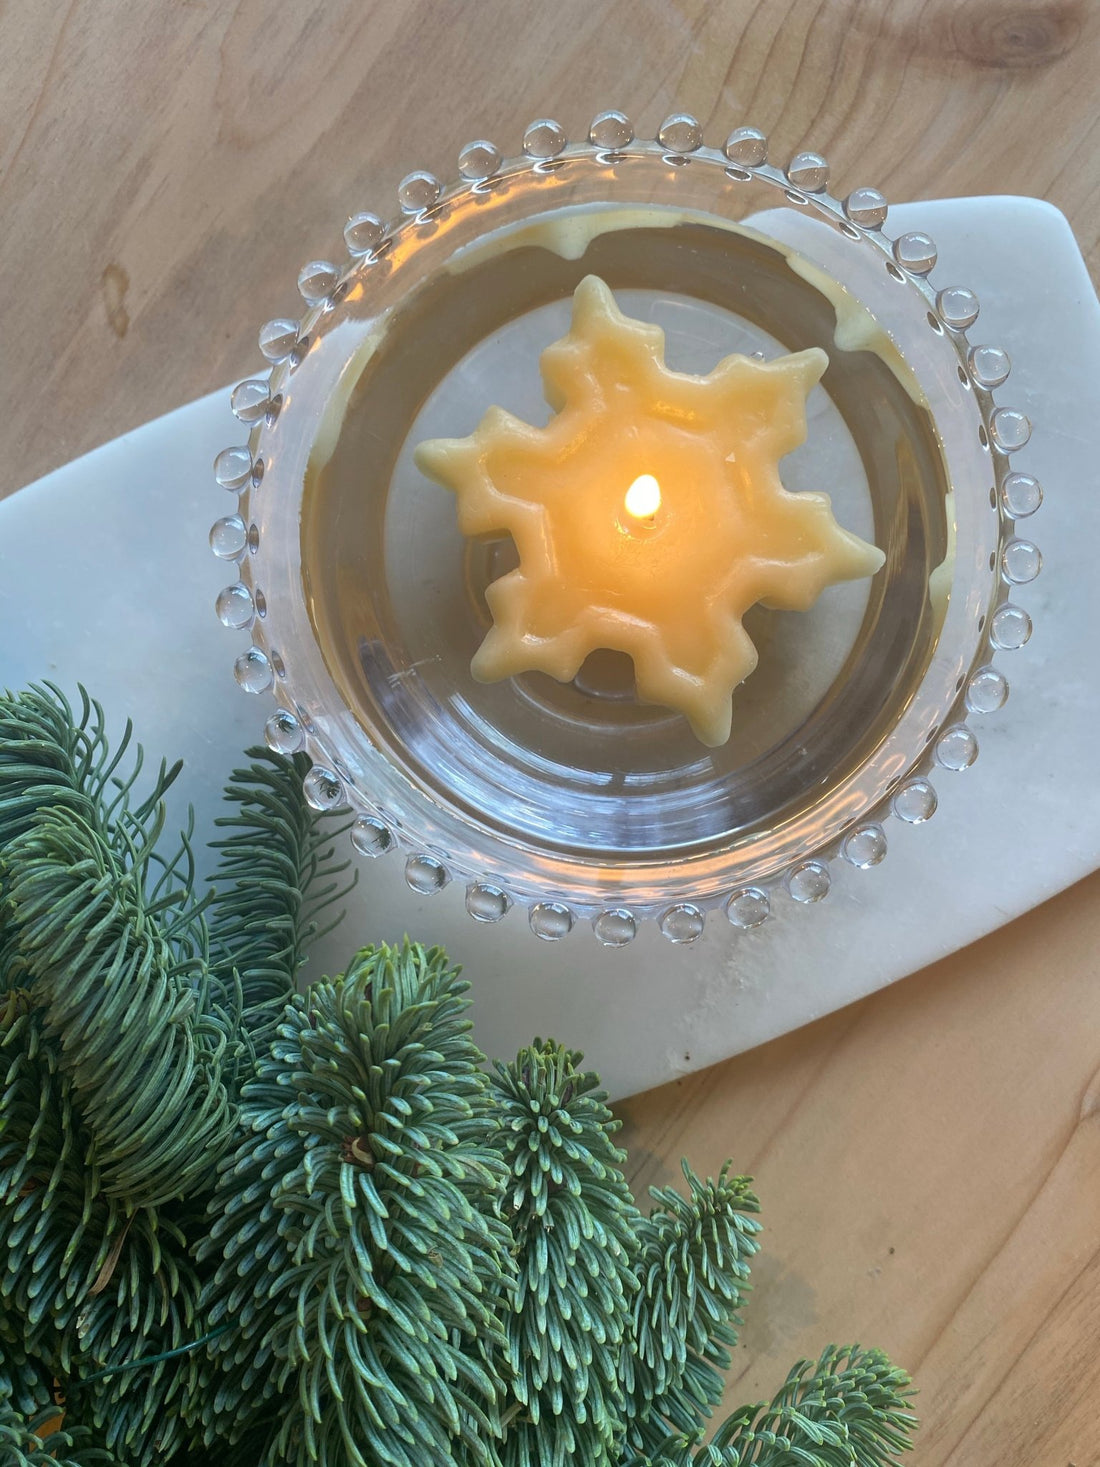 Beeswax Floating Snowflake Candle